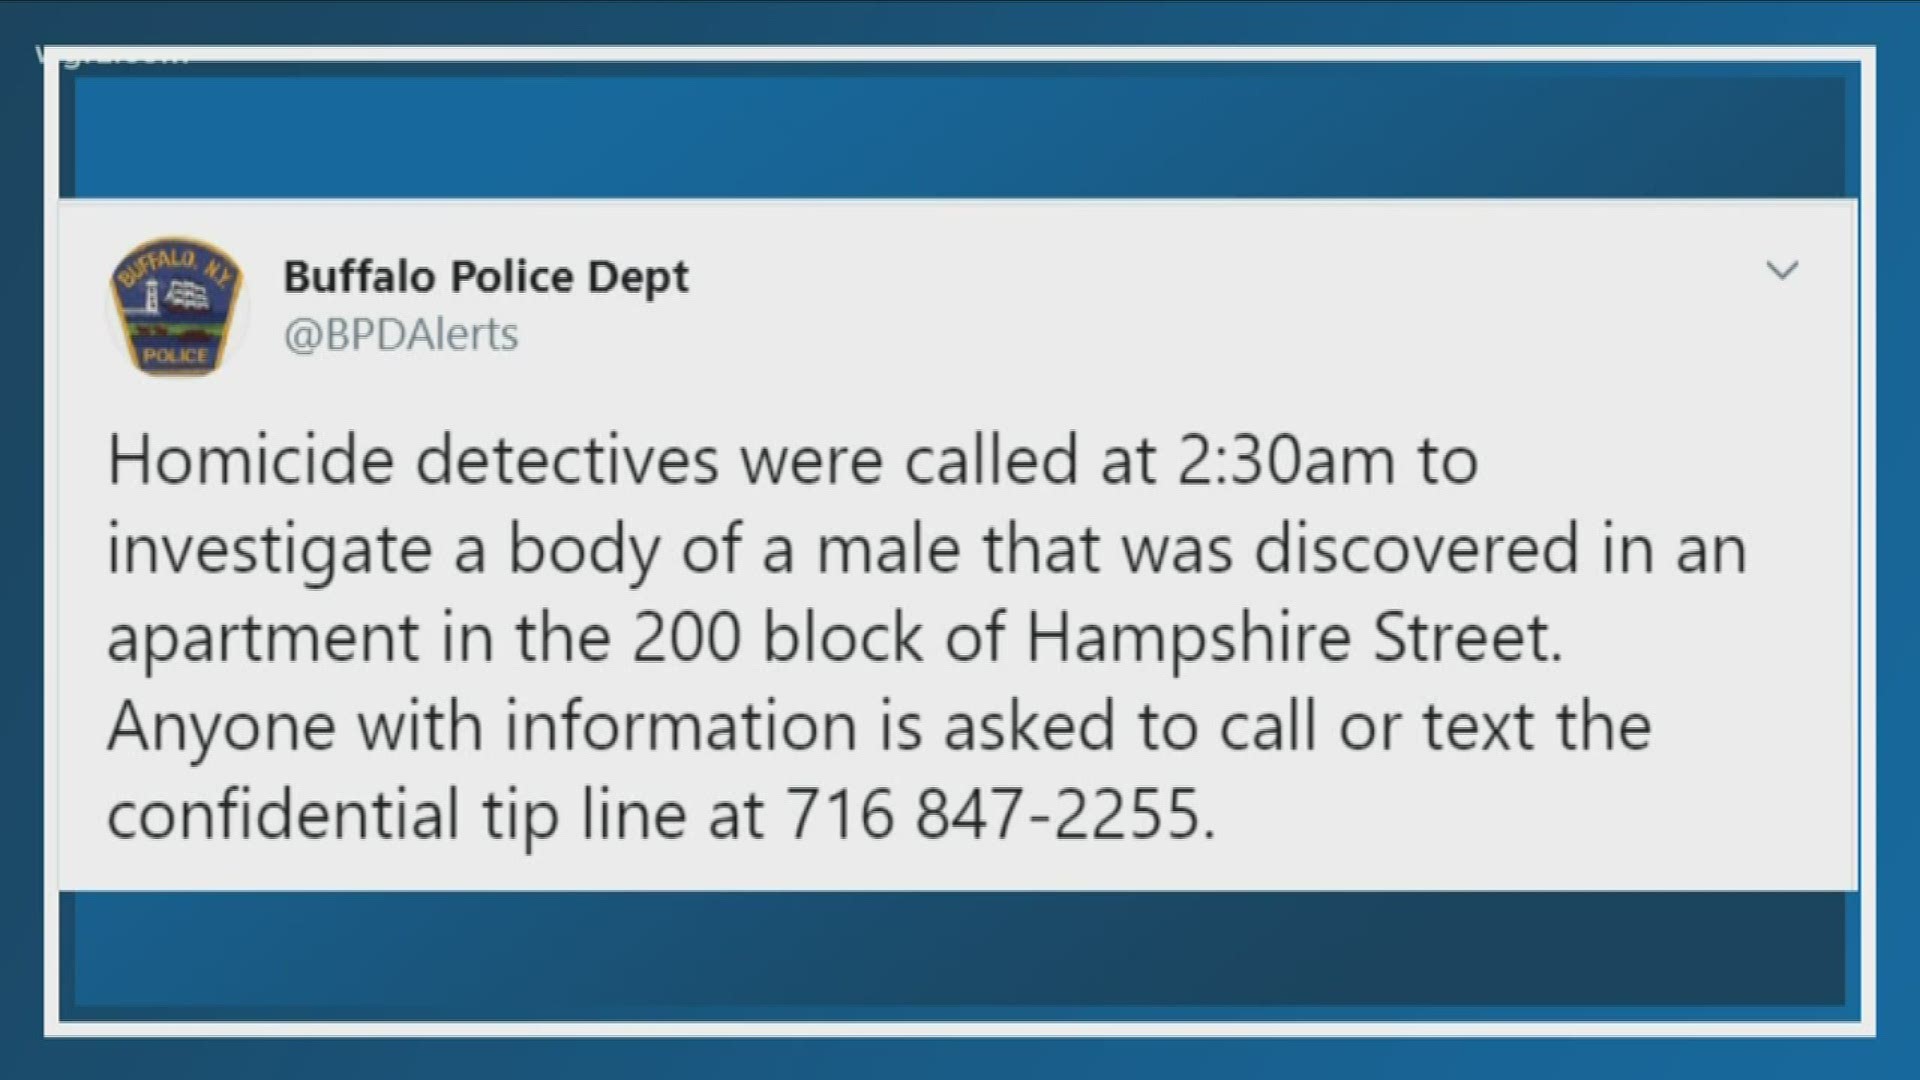 DISCOVERED IN AN APARTMENT ON THE 200 BLOCK OF HAMPSHIRE STREET AROUND 2-30 THIS MORNING.